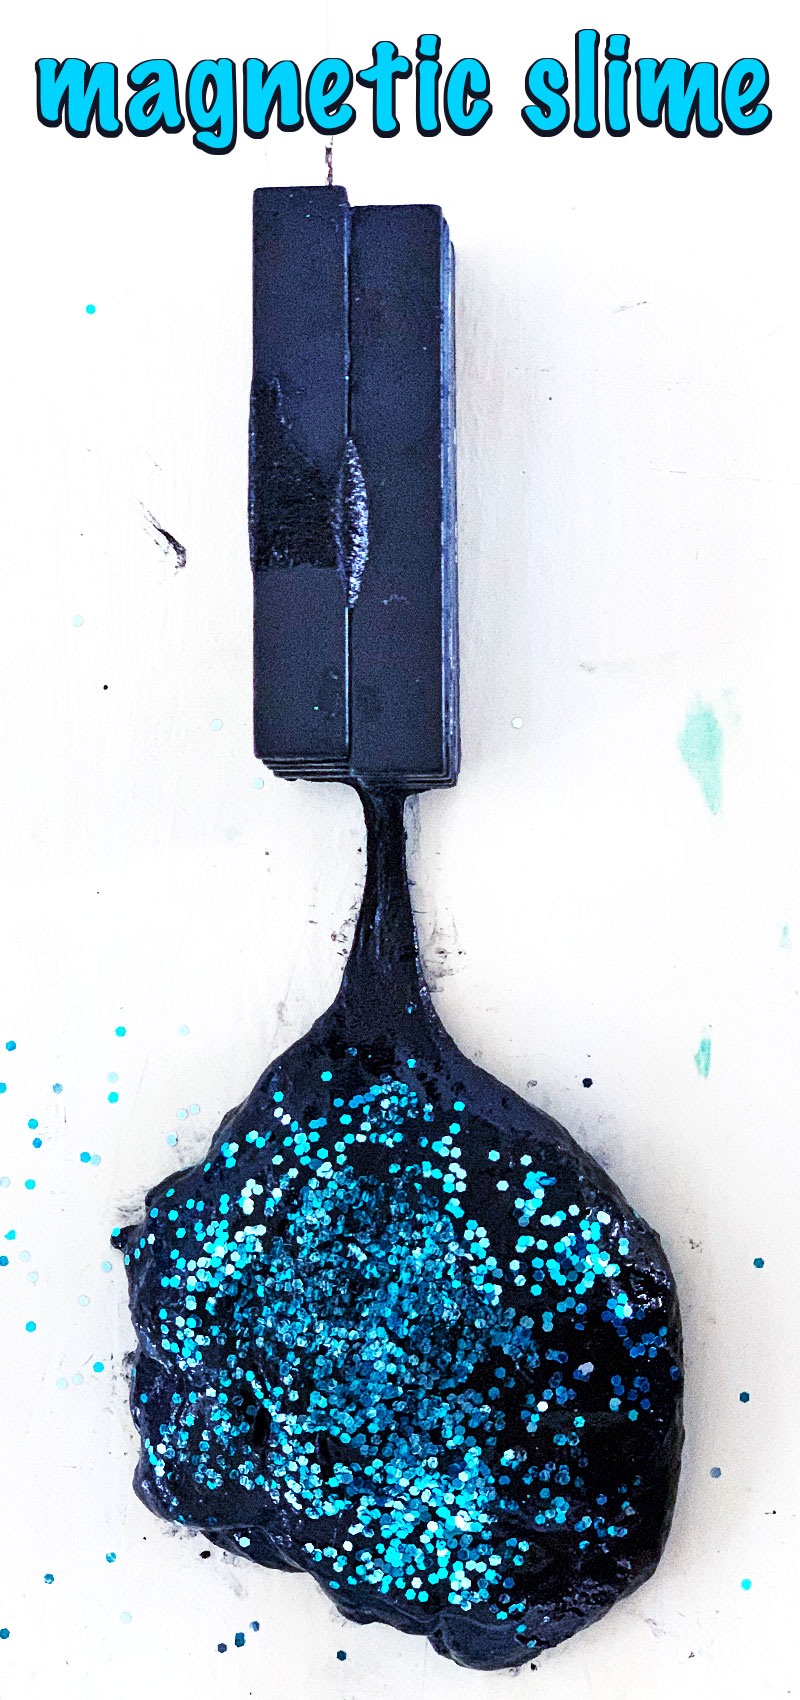 Learn how to make black slime thats magnetic! This homemade slime craft uses Elmer\'s glitter glue and glow in the dark glue to create glittery black slime. #slime #magneticslime #blackslime